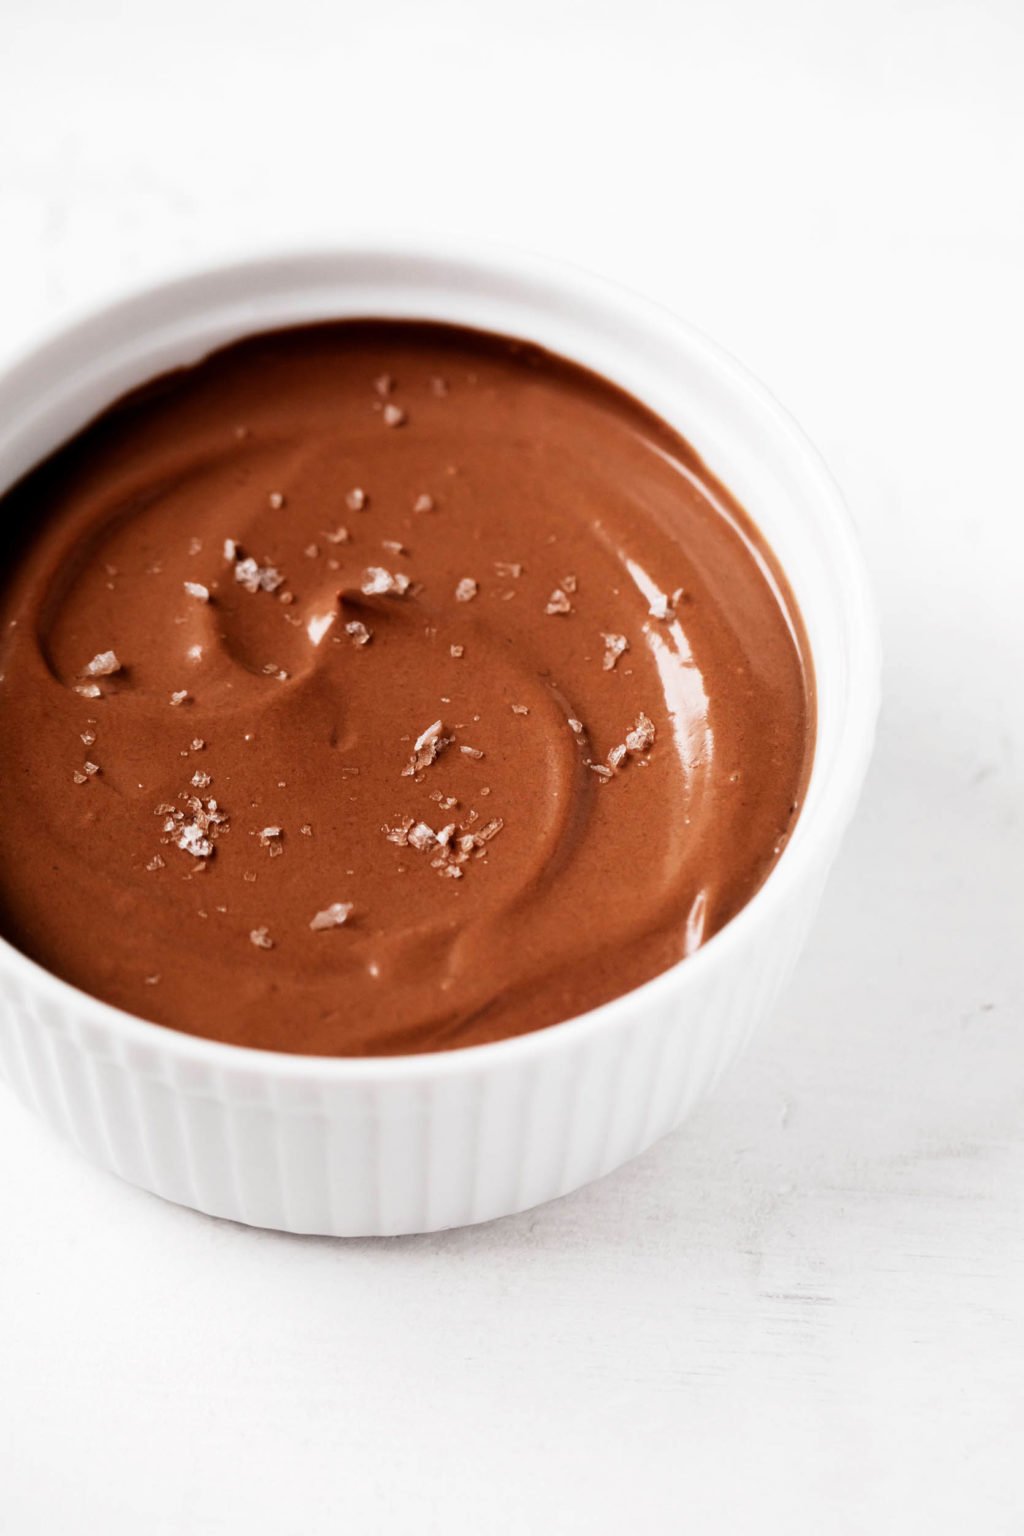 A small, round container of vegan silken tofu chocolate pudding has been topped with flaky sea salt.